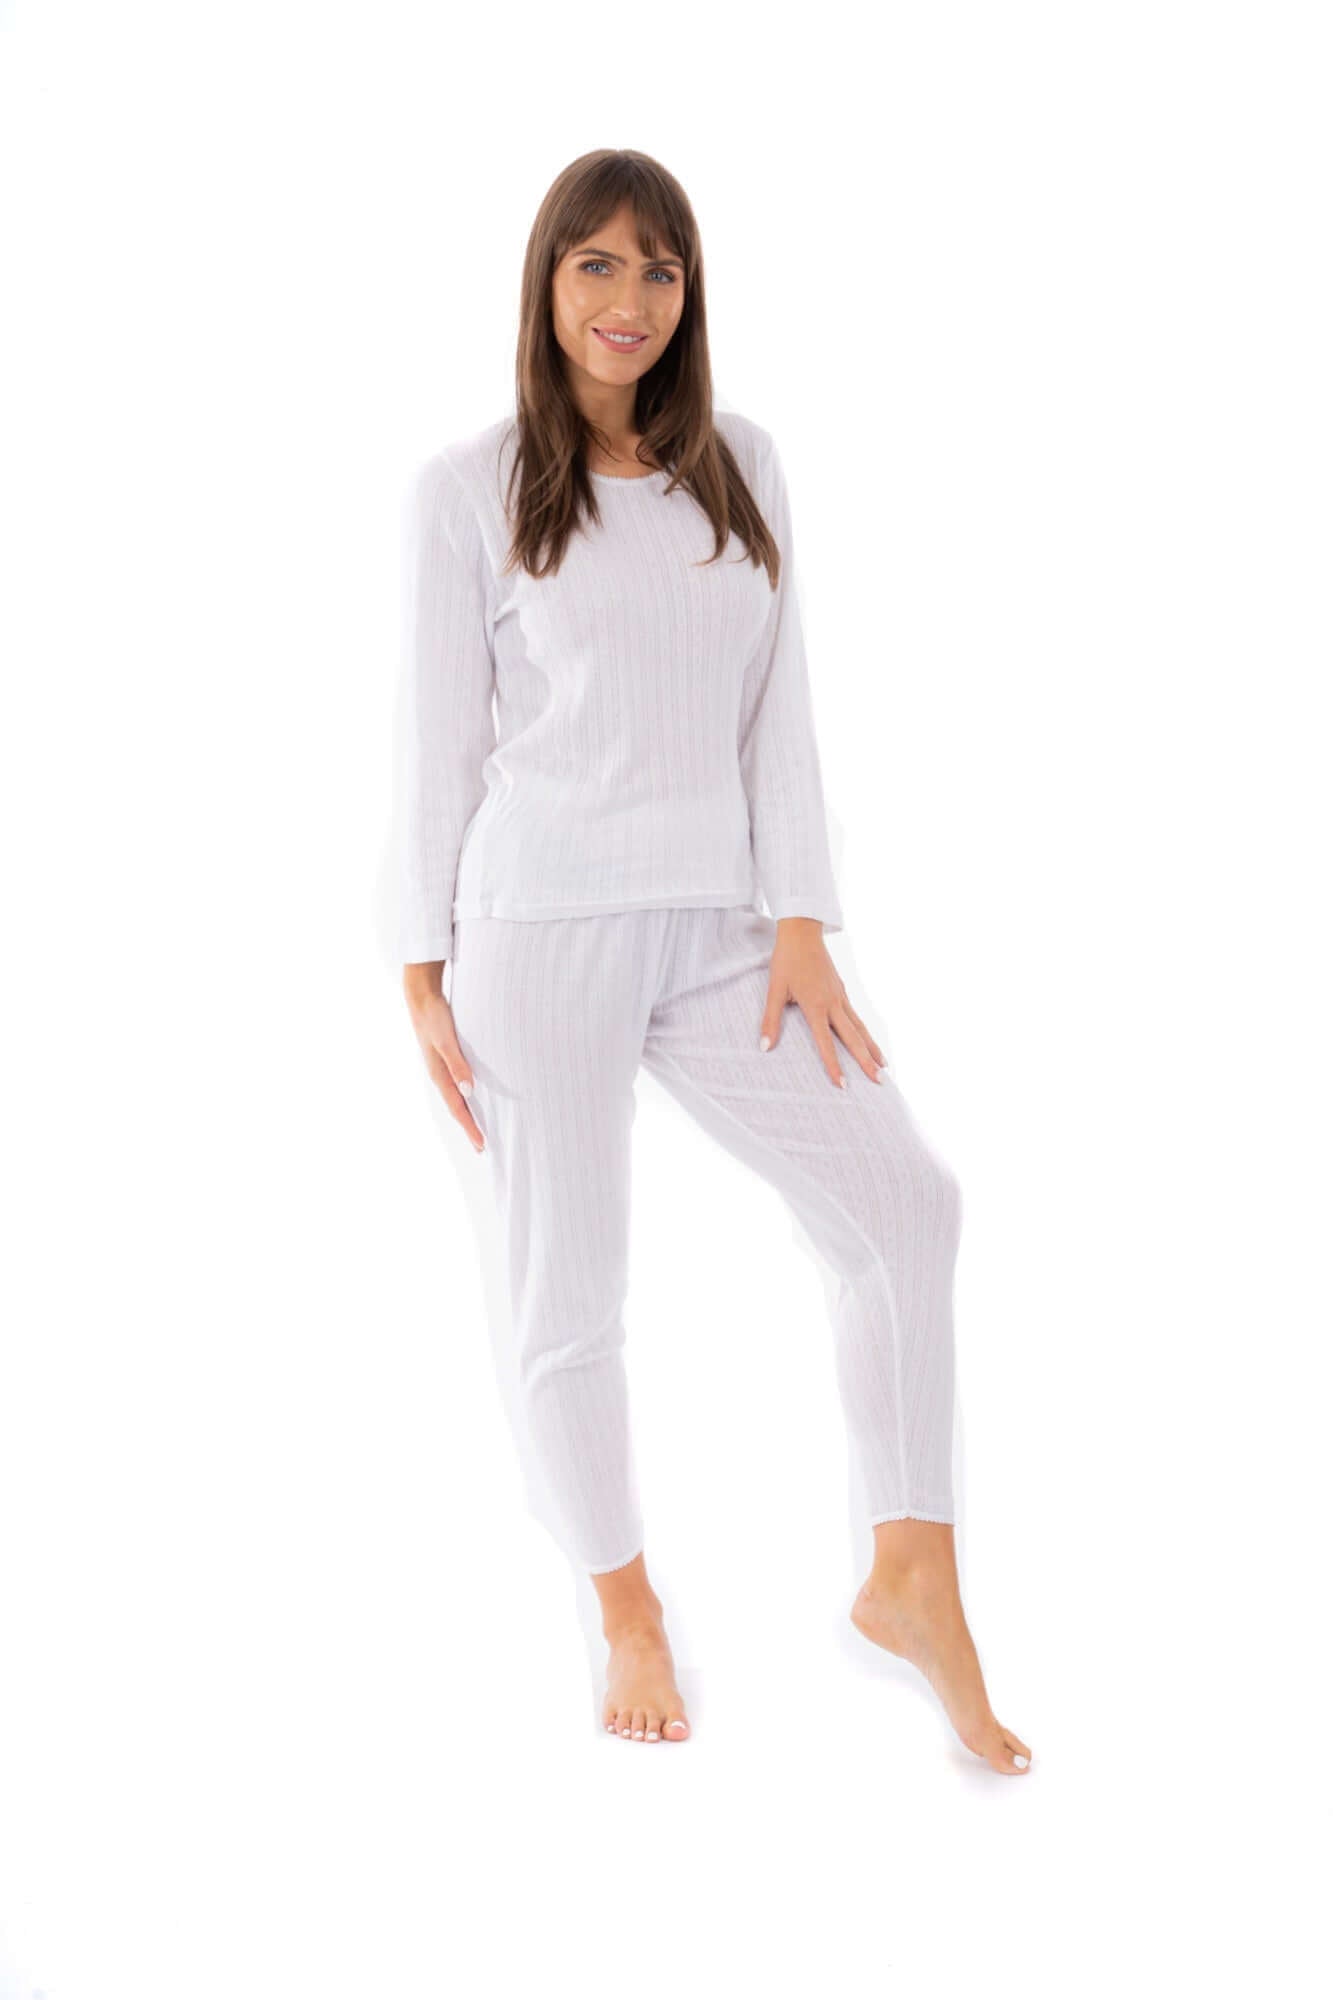 Heatwave® Women's Thermal Long Sleeve Top & Pants Sets, Warm Winter Baselayers. Buy now for £10.00. A Thermal Underwear by Daisy Dreamer. 10-12, 14-16, 16-18, 18-20, 20-22, 22-24, 8-10, baselayer, black, bridesmaid, daisy dreamer, grey, gym, heatwave, hik